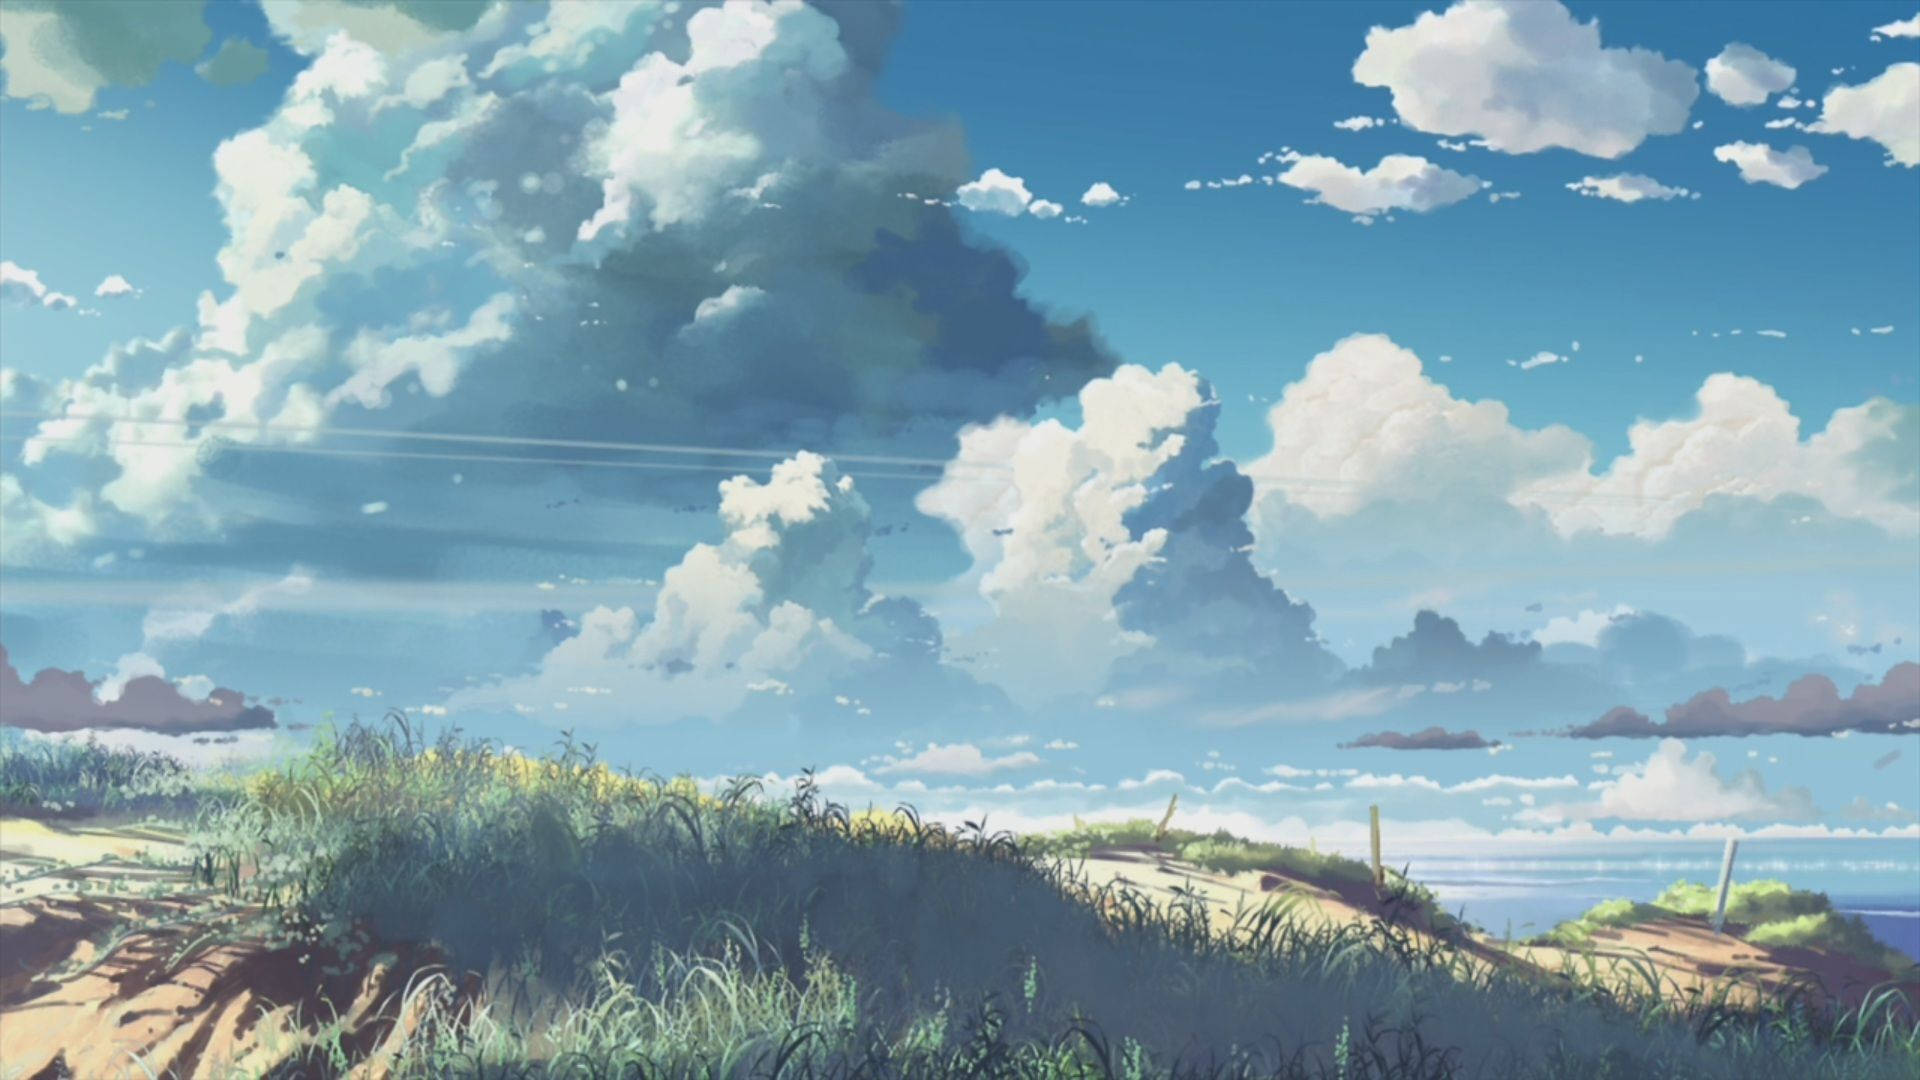 Details more than 80 anime sceneries